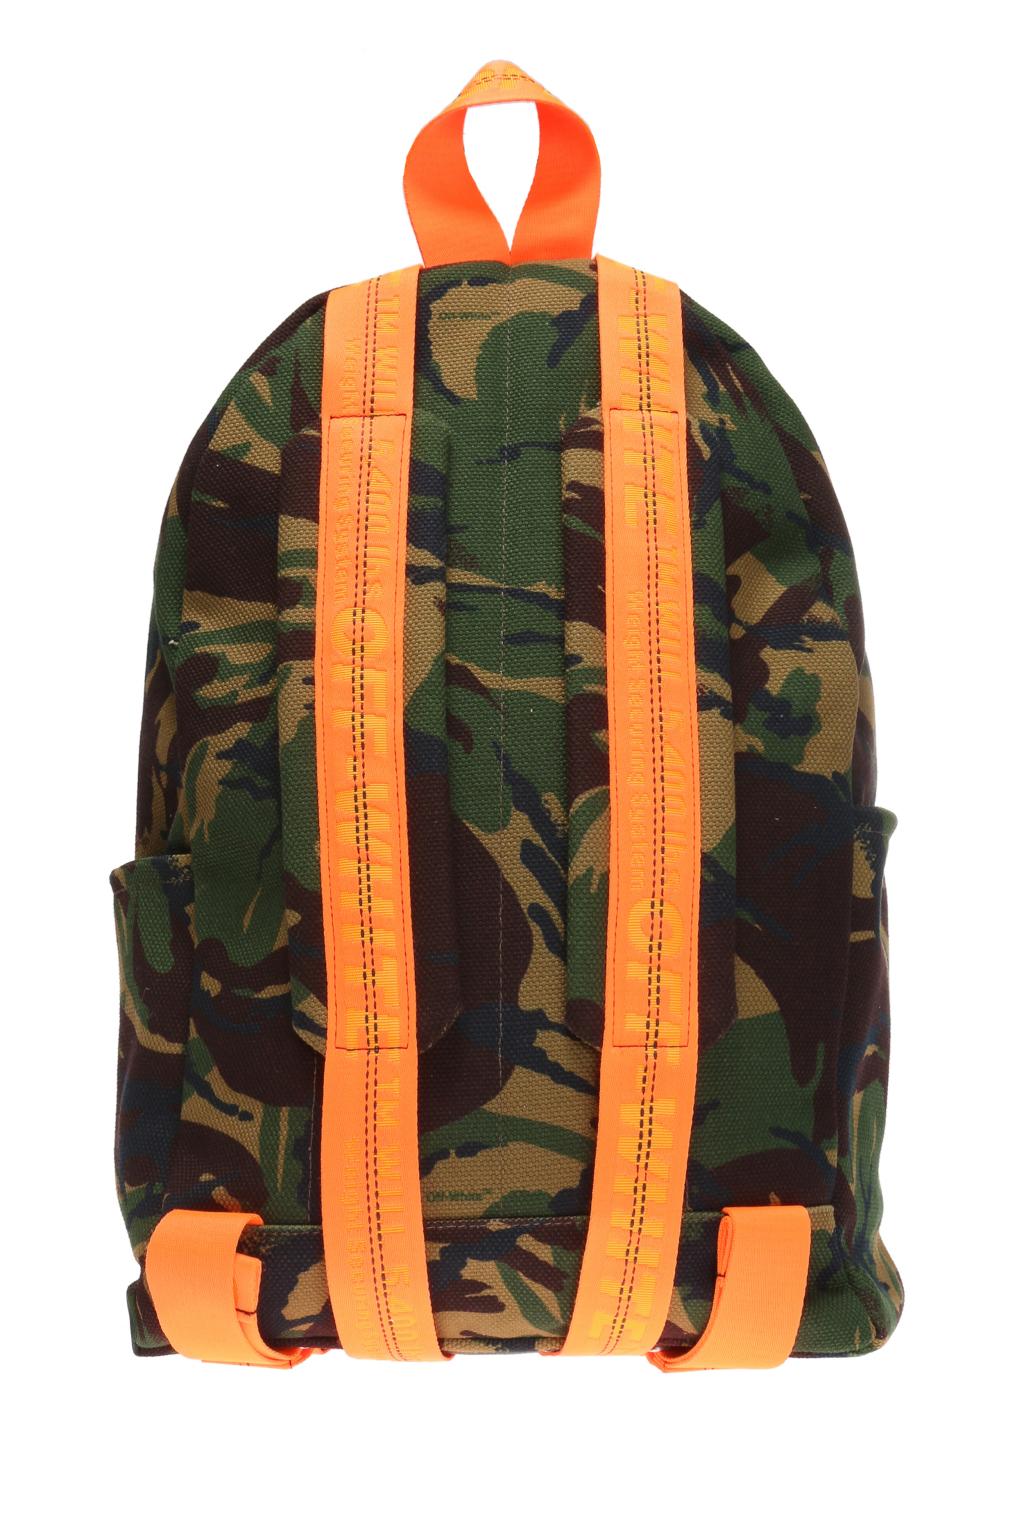 Off-White - Printed Canvas Backpack - Orange Off-White